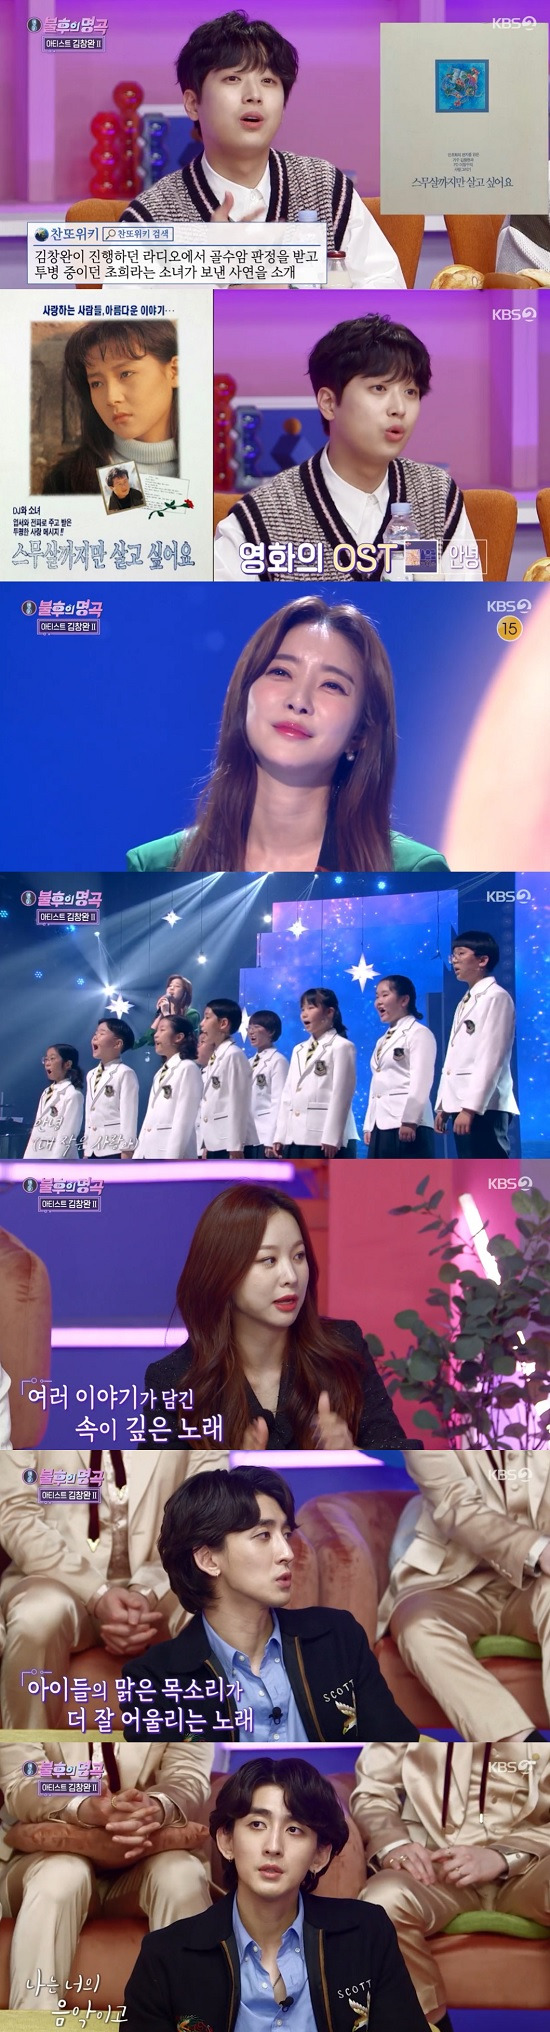 The 548th KBS 2TV entertainment program Immortal Songs: Singing the Legend, which aired on the 26th, was followed by The Artist Kim Chang-wan after last week.He is with Lee Su-hyun, The Artist Kim Chang-wan, Lee Su-hyun of Lee Su-hyun, and has staged a number of prominent singers including Crying Nut, Zambinai, Kim Jae-hwan, Forestella and Hope.On the day of the broadcast, Lee Seung-yoon said that he won the first division.MC Kim Joon-hyun said, I will just leave a good video. He said this humility and went up and won the championship. Lee Seung-yoon said, There was something I wanted to do, but when I see a football or something, I shout (tropy). The cast members said, I become miserable as Choi Jung-hoon, who was next to me.Im next to Baro. Kim Joon-hyun said, If you are the one, you have to say we have a plan. Lee Seung-yoon then presented the championship ceremony with a trophy.Lee Chan-won mentioned Lee Seung-yoons last stage heart performance, and Lee Seung-yoon explained, I think I was excited because of the audience because I performed only after my debut.He also reproduced the heart performance and laughed, saying, It always seems to humiliate when I come to the arts.Gong Hope said that he chose Hello of Sanulim 11th album as a stage selection.Lee Chan-won introduced the song and introduced the story of a girl named Cho Hee who was diagnosed with bone marrow cancer on the radio that Kim Chang-wan was conducting.I have been supported by listeners by the message I want to live until I am 20 years old, but I died 20 years ago.Based on this story, the movie was made, and the OST of this movie was Baros song Hello.The ball was on stage for Hello, and Solsey said, Its a song with a lot of stories and a lot of comfort.It seems that the heart melted when twenty children, not one, sing in harmony. Choi Jung-hoon said, I was impressed. When the children came out, I thought that the childrens voice sounded better. The voice of Hope was well suited and I was in love.Lee Chan-won asked, Do you have a song with your heart for your fans? Choi Jung-hoon said, There are many, among them Together.Photo = KBS 2TV broadcast screen